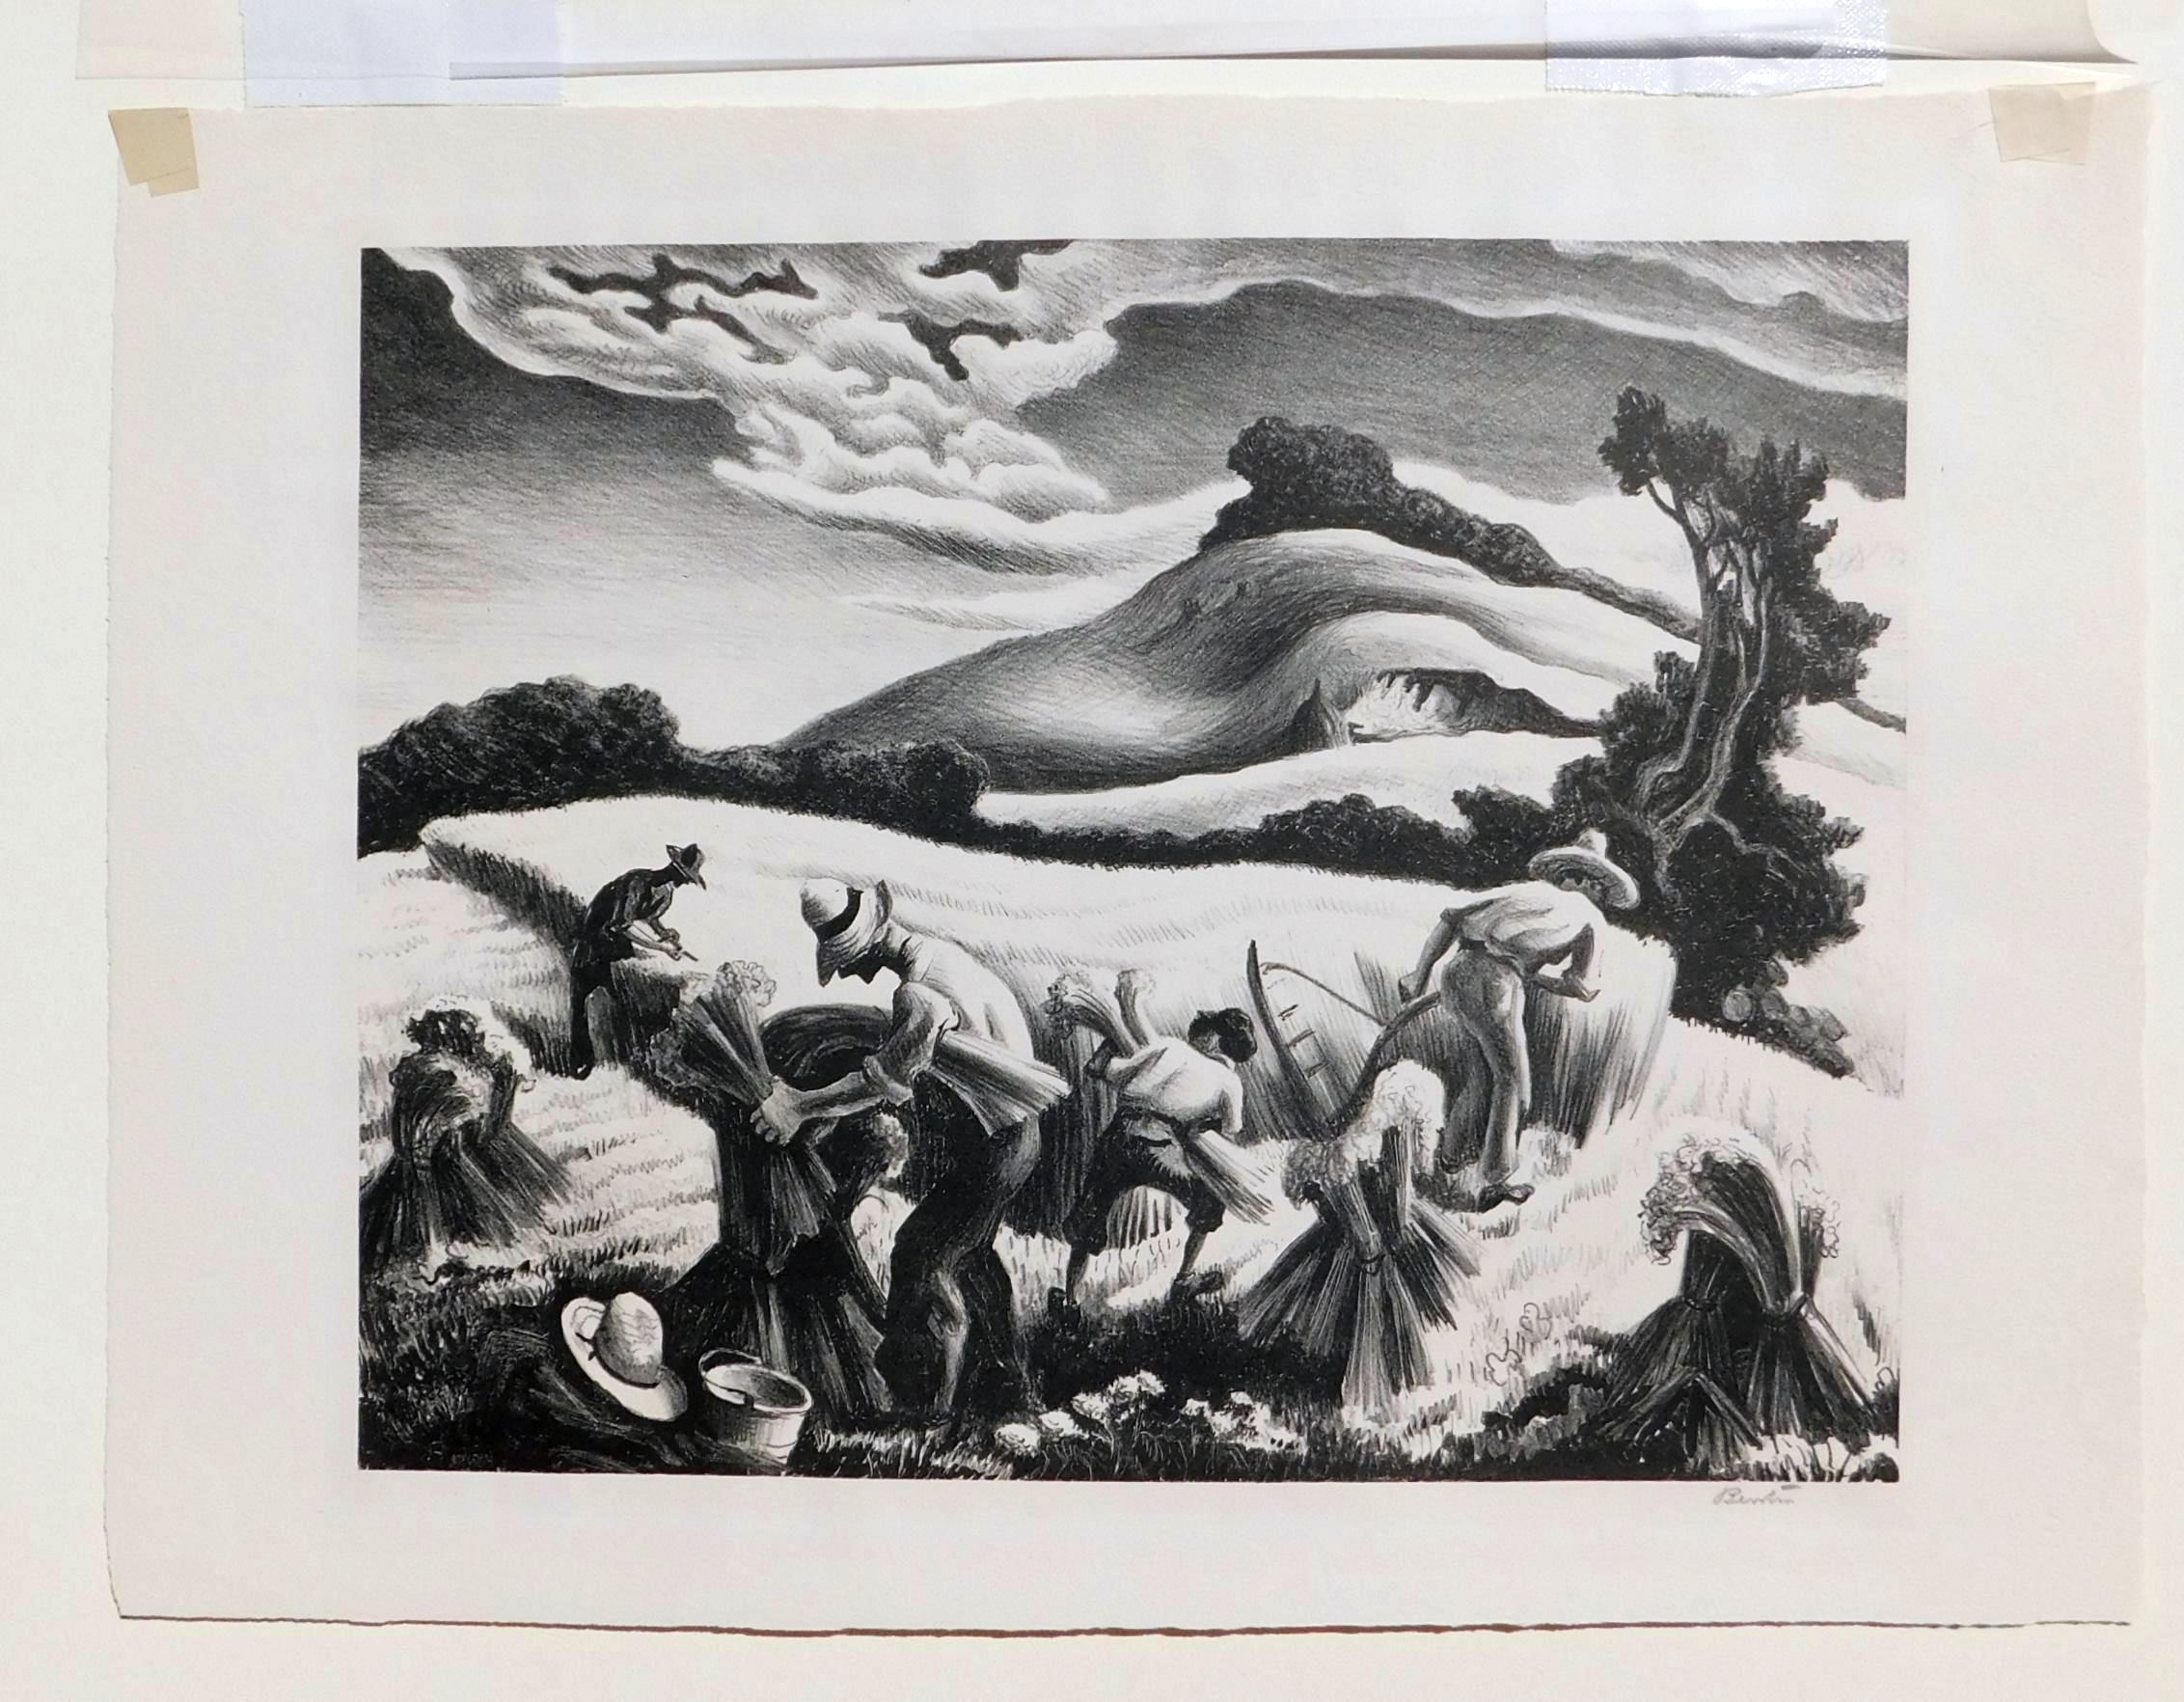 Original stone lithograph created 1939 by well-known Regionalist Thomas Hart Benton.
The print is in fine condition with full margins and pencil signed lower right. 
Also signed in the stone lower left. Fath #27. Image size: 9 1/2